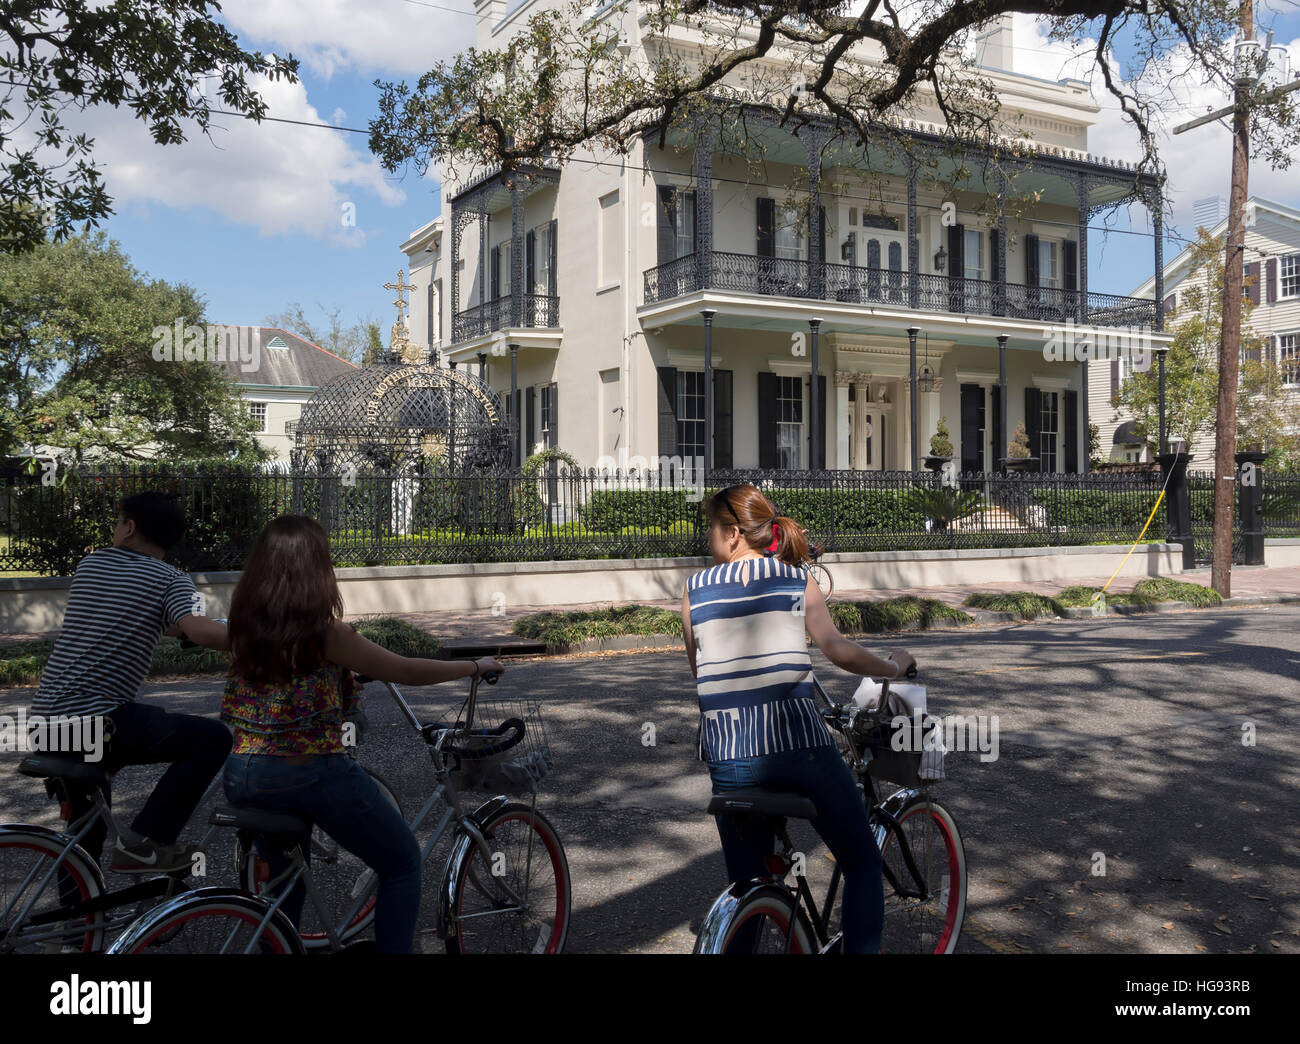 Our Mother of Perpetual Help chapel house, Garden District, New Orleans. Tourists on a bicycle tour visit the historic house. Stock Photo